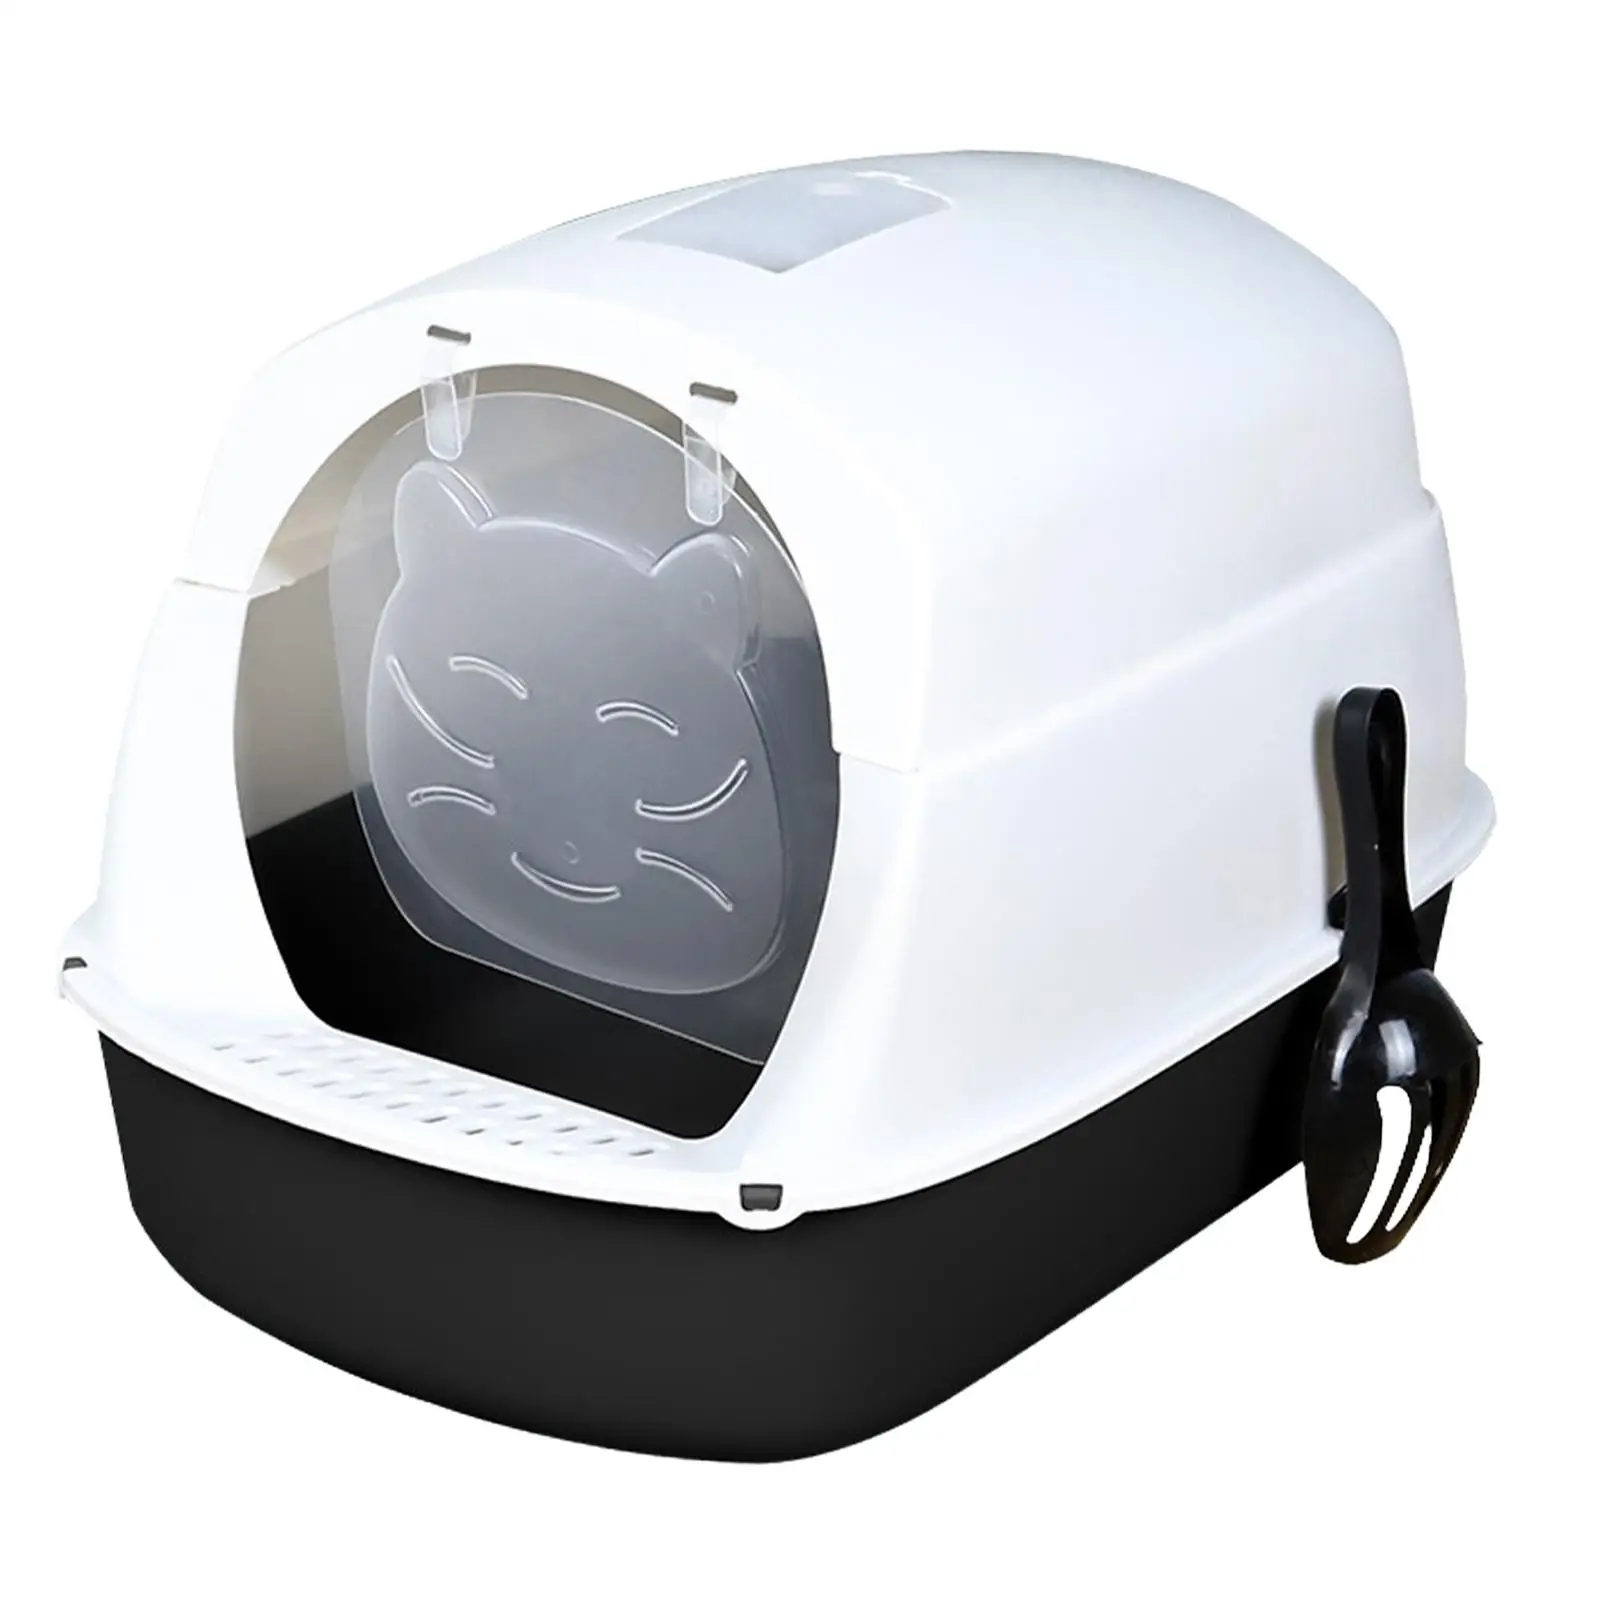 Hooded Cat Litter Box with Lid Fully Enclosed Cat Toilet Detachable Durable Large Cat Litter Box Cat Litter Tray Pet Accessories